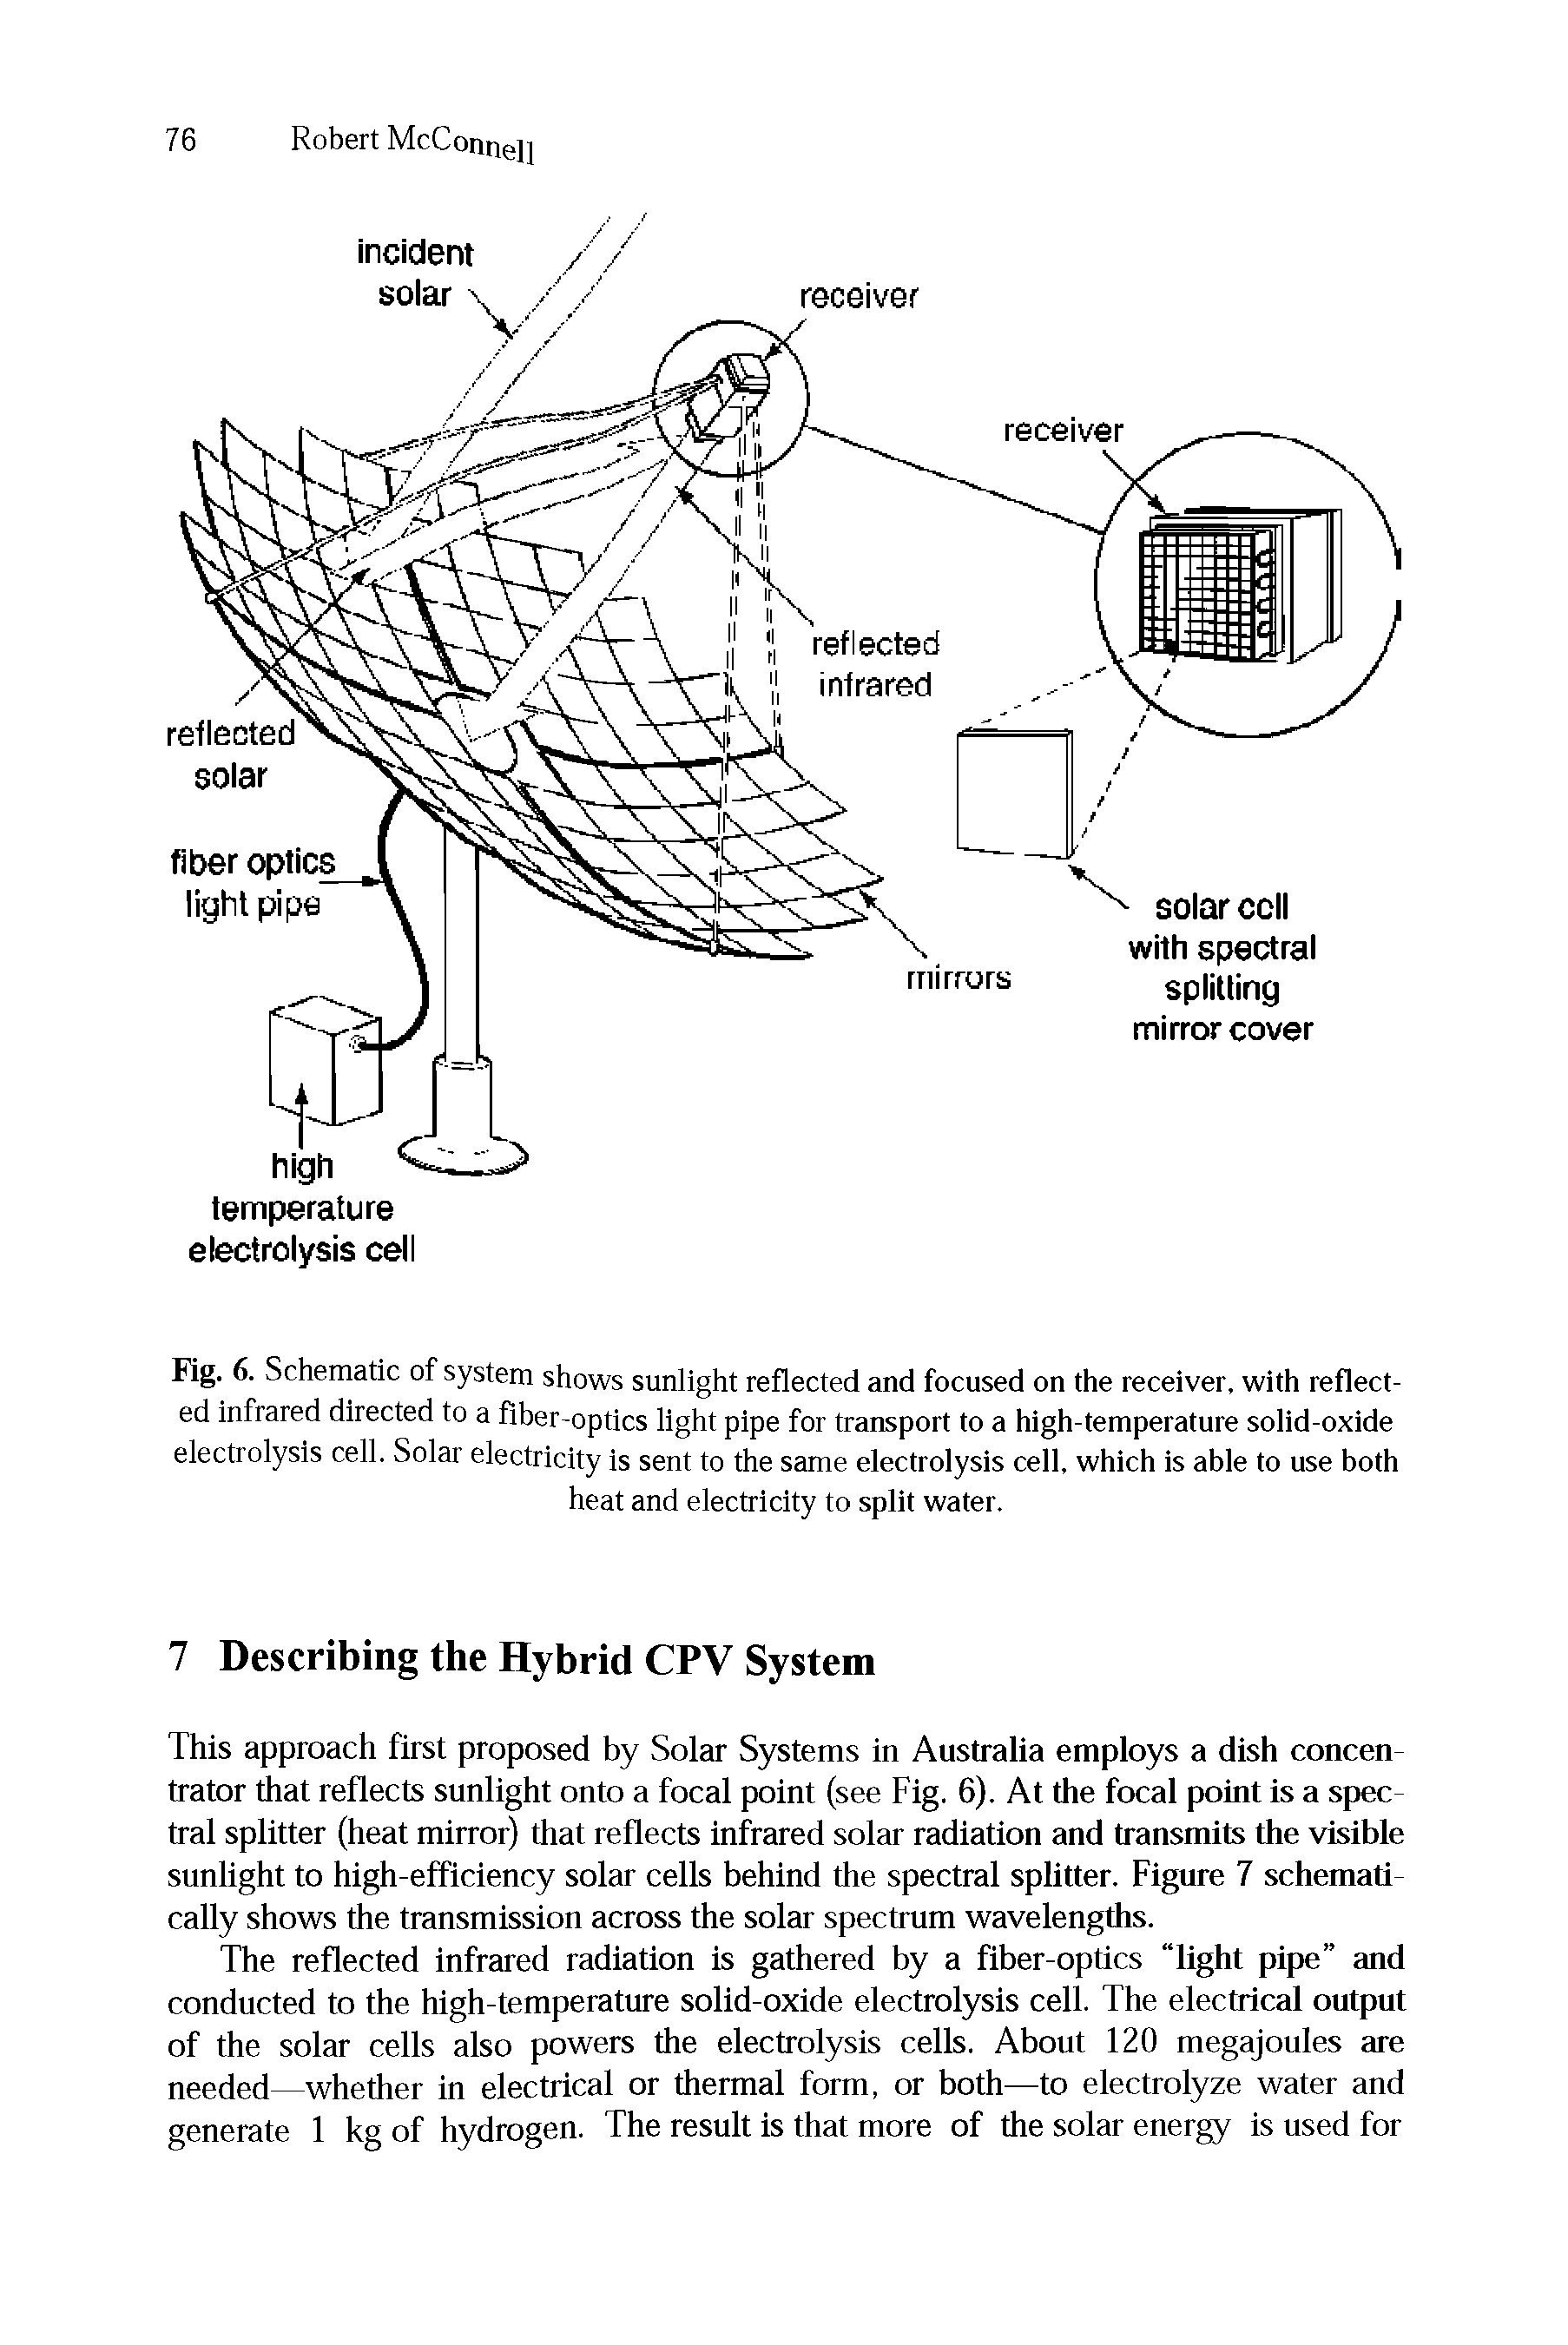 Fig. 6. Schematic of system shows sunlight reflected and focused on the receiver, with reflected infrared directed to a fiber-optics light pipe for transport to a high-temperature solid-oxide electrolysis cell. Solar electricity is sent to the same electrolysis cell, which is able to use both...